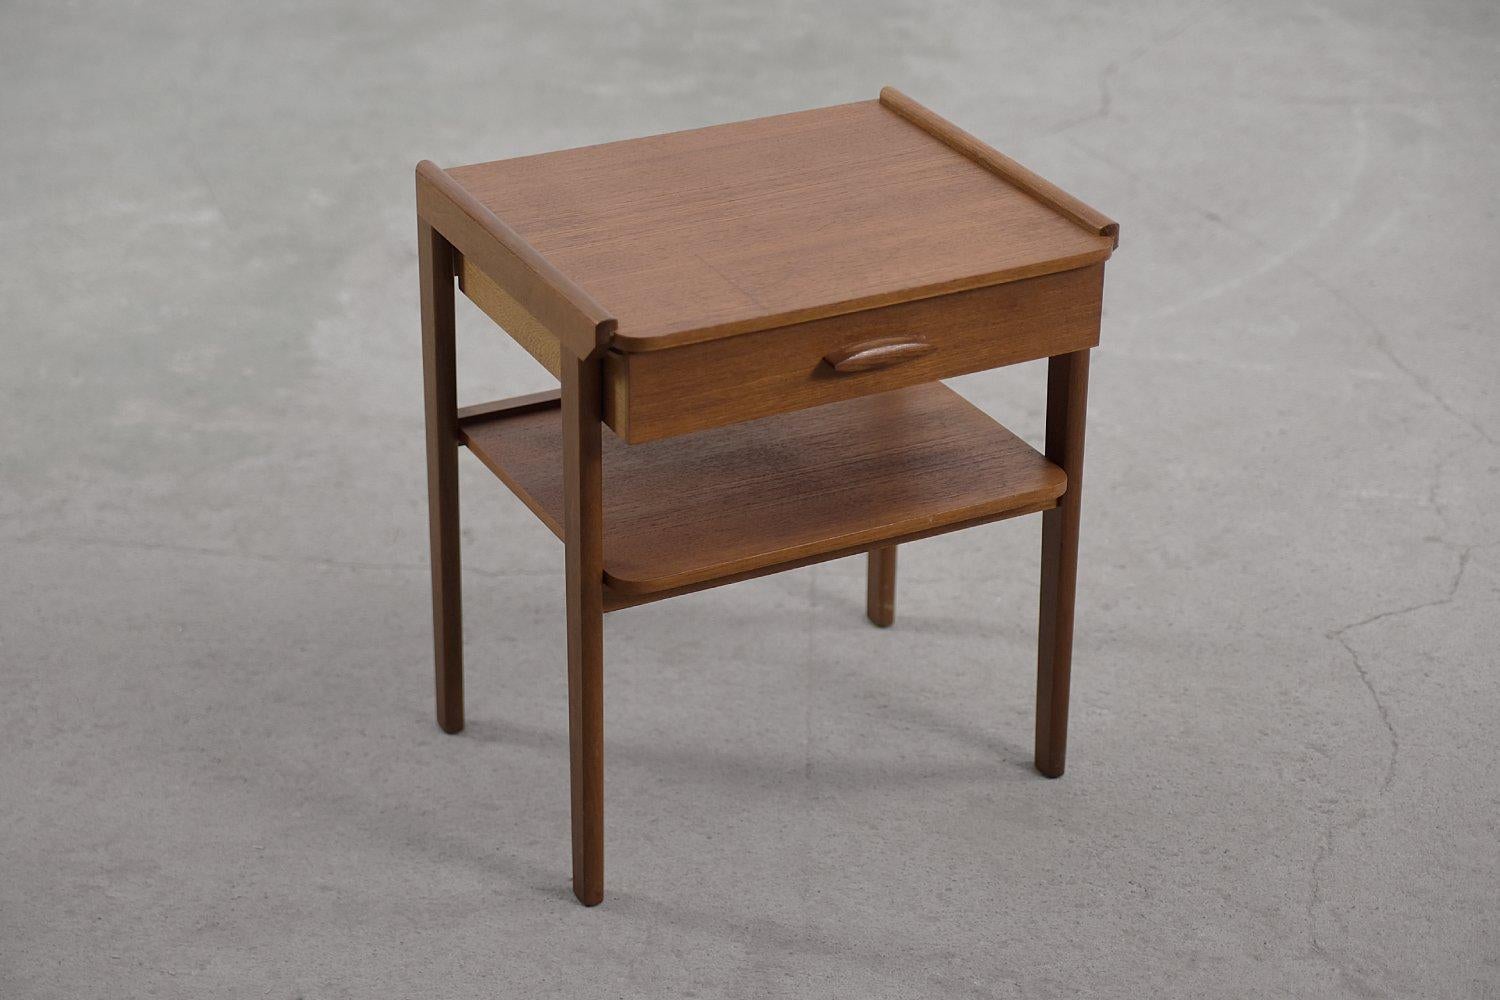 This modernist night table was manufactured in Sweden during the 1950s. It is finished with teak wood in honey brown color. This kind of wood has a high content of natural oily substances, which makes it highly water-resistant. The cabinet has one